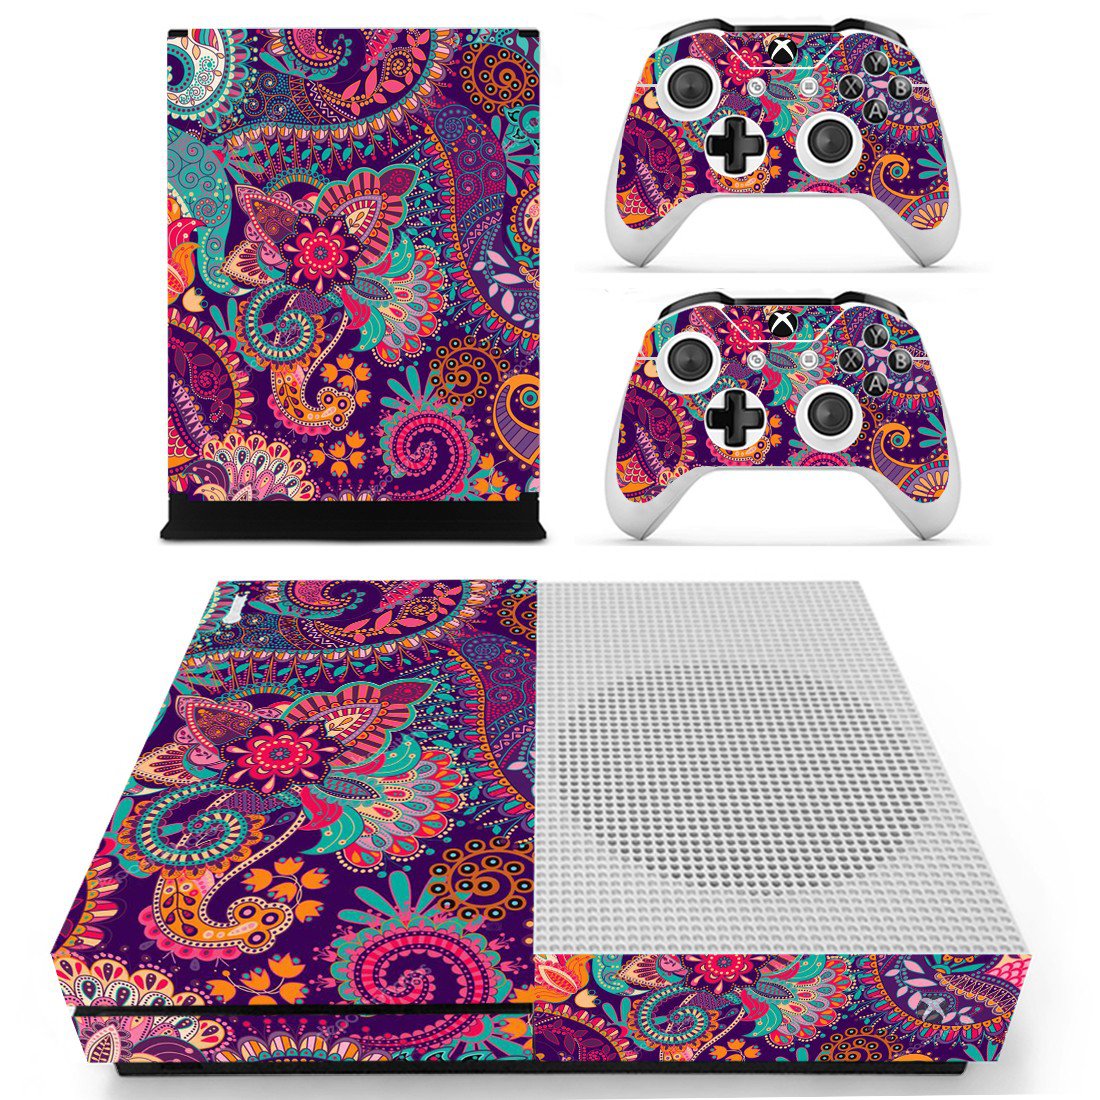 Xbox One S And Controllers Skin Sticker - Abstraction Design 3